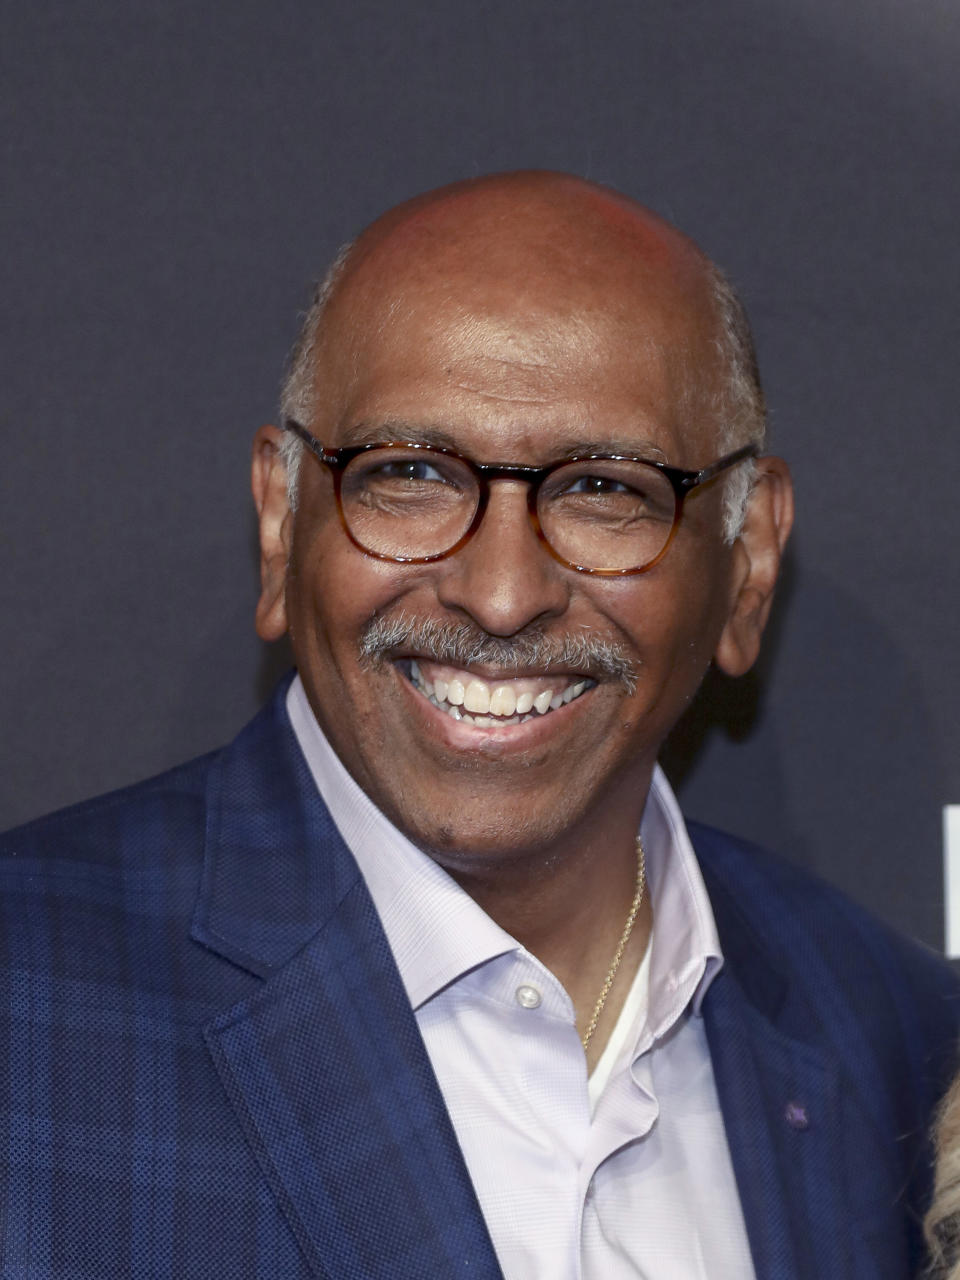 FILE - Michael Steele attends the 27th annual Webby Awards in New York on May 15, 2023. Steele will co-host a new MSNBC show called “The Weekend,” airing for two hours starting at 8 a.m. Eastern on Saturday and Sunday. (Photo by Andy Kropa/Invision/AP, File)